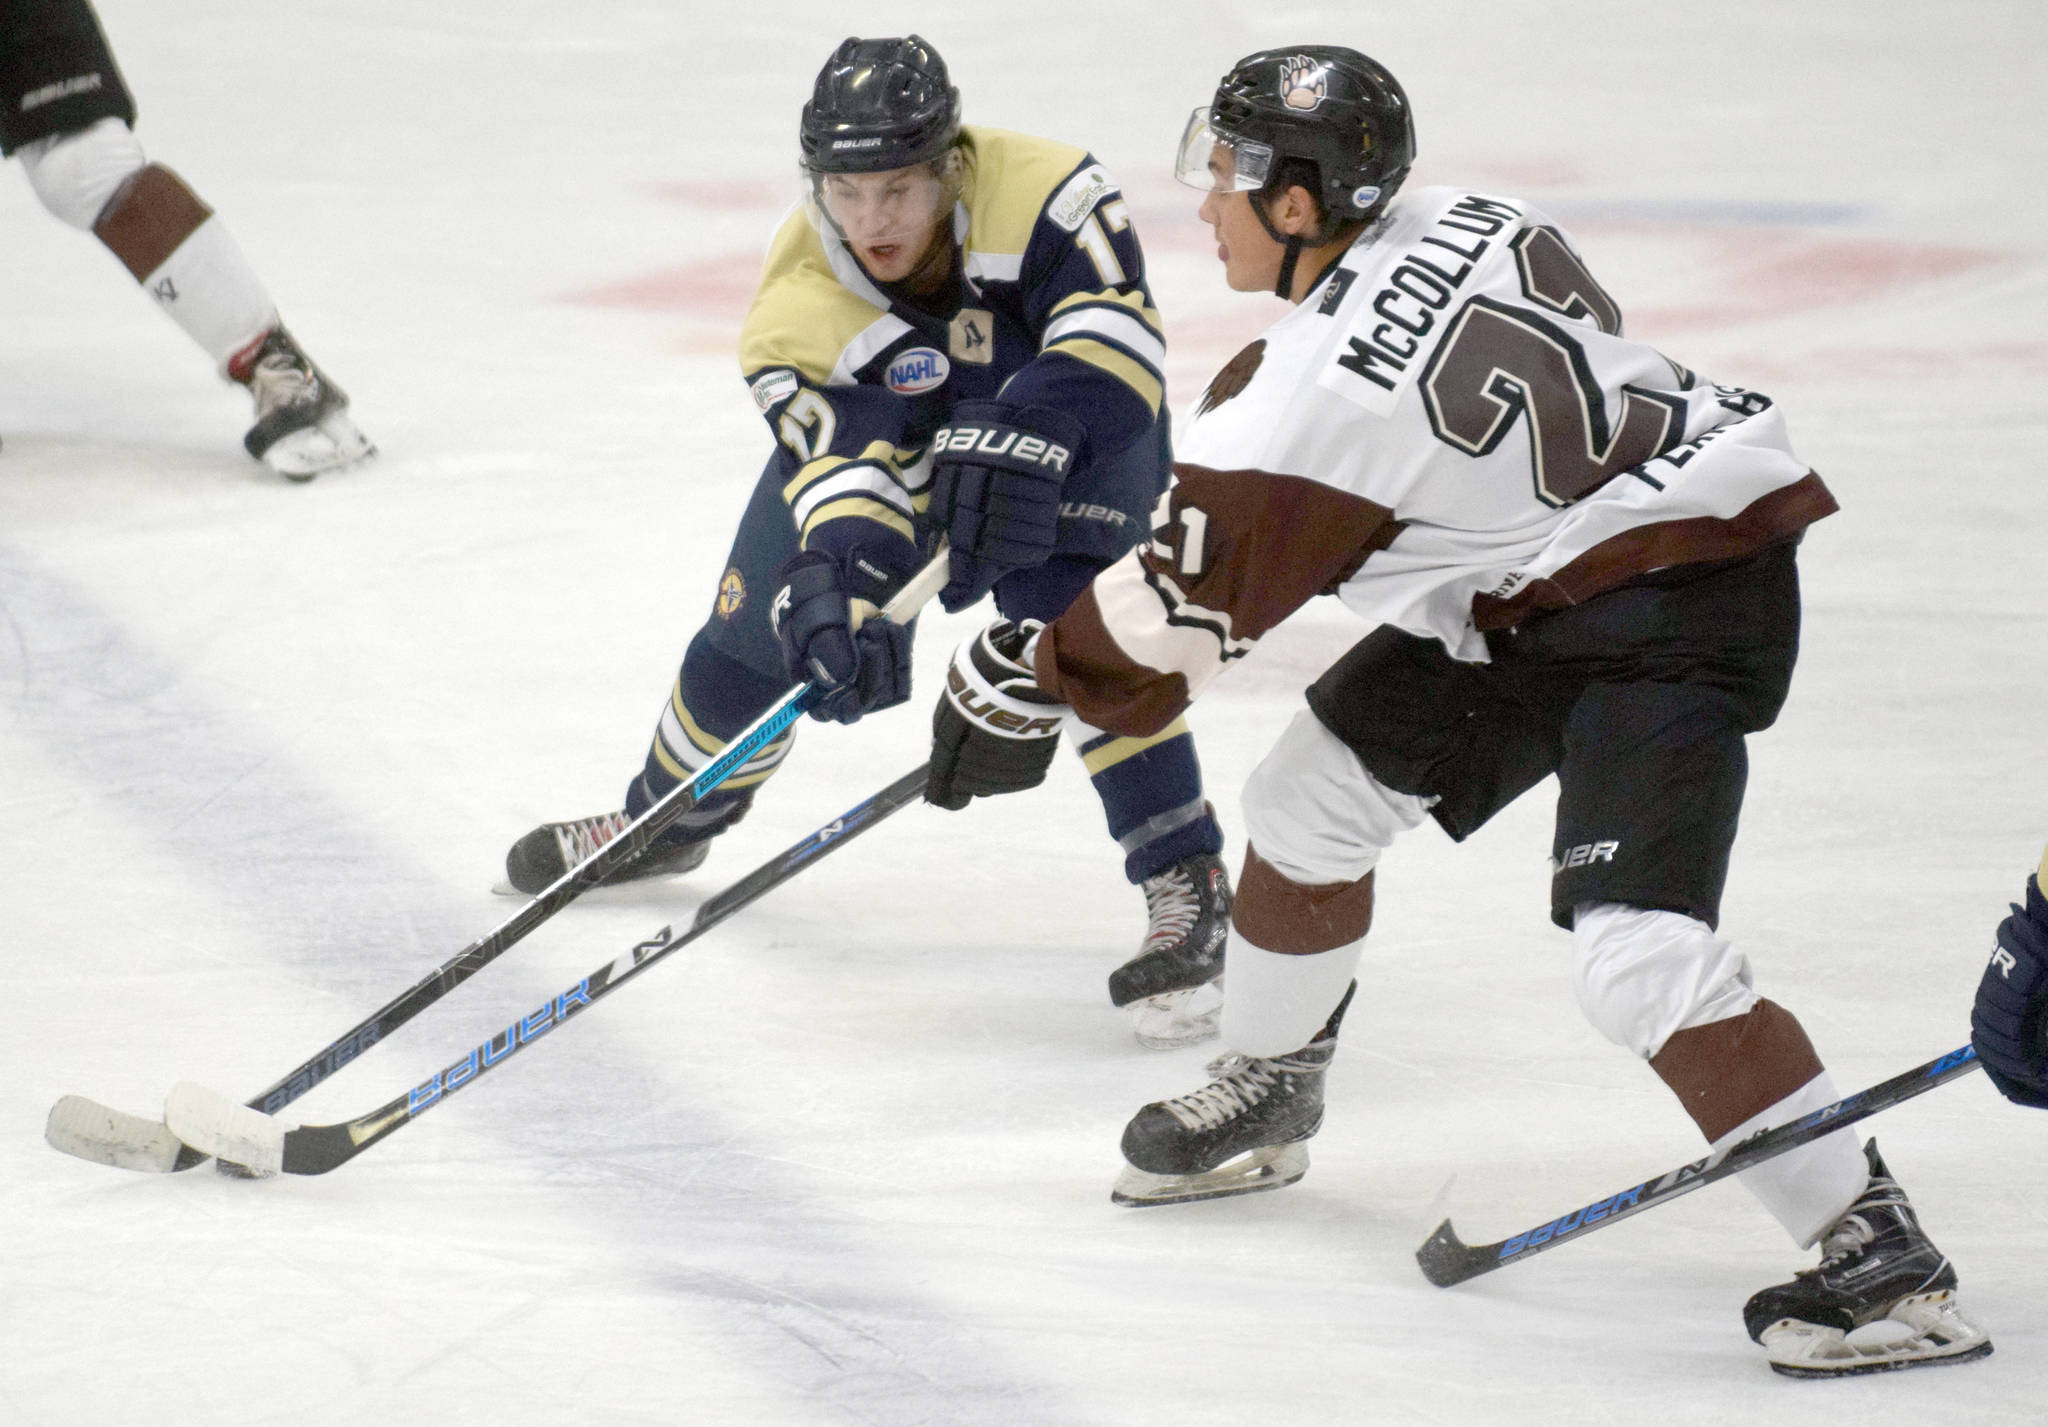 Luke Wheeler of the Janesville (Wisconsin) Jets and Robert McCollum of the Kenai River Brown Bears battle for the puck on Friday, Oct. 11, 2019, at the Soldotna Regional Sports Complex in Soldotna, Alaska. (Photo by Jeff Helminiak/Peninsula Clarion)